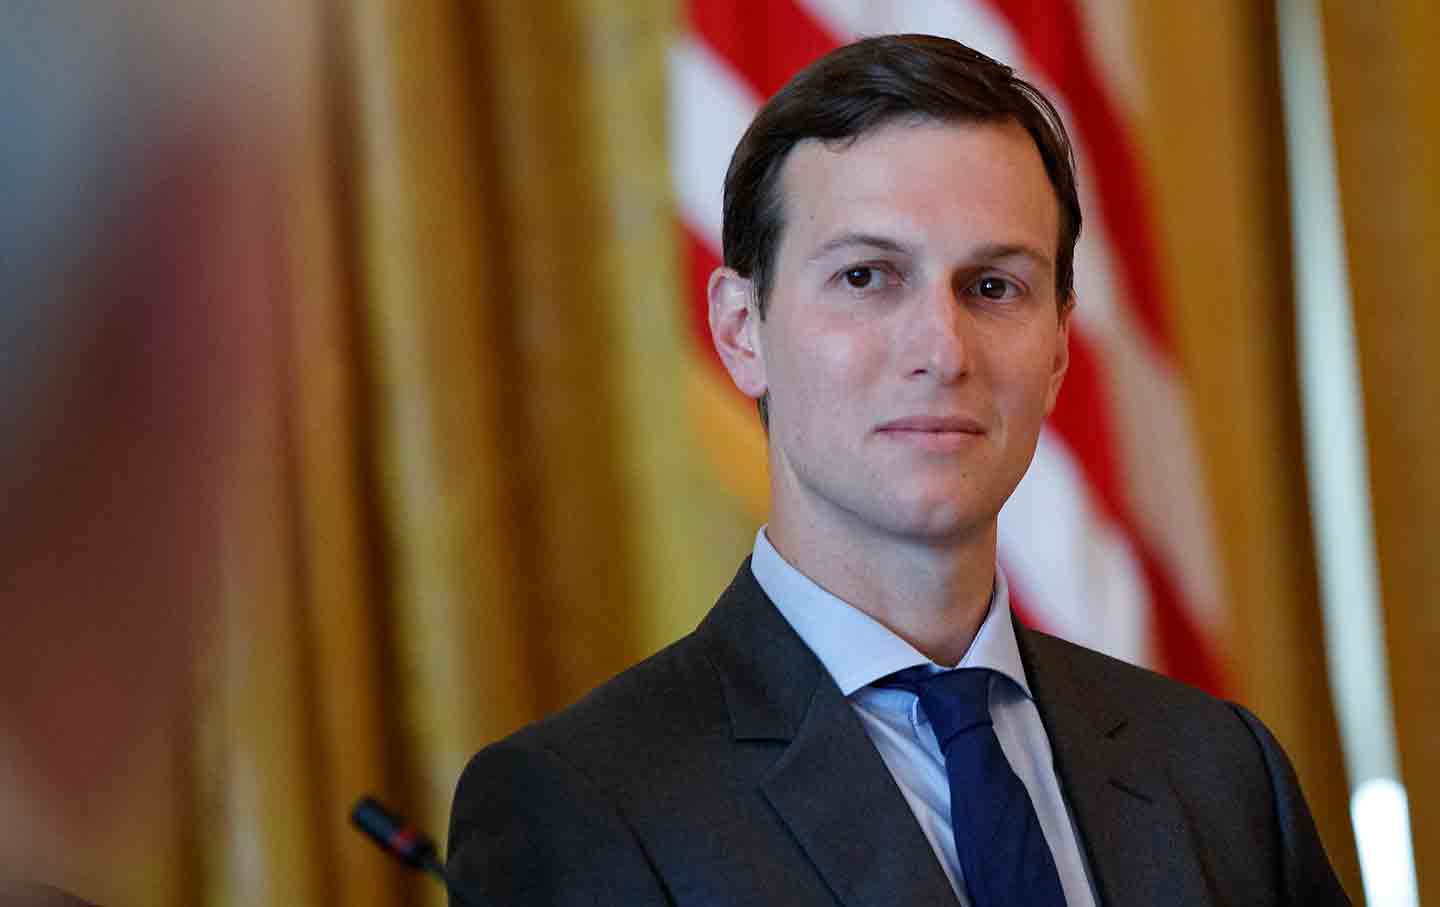 Jared Kushner S Time At The White House May Be Coming To An End The Nation